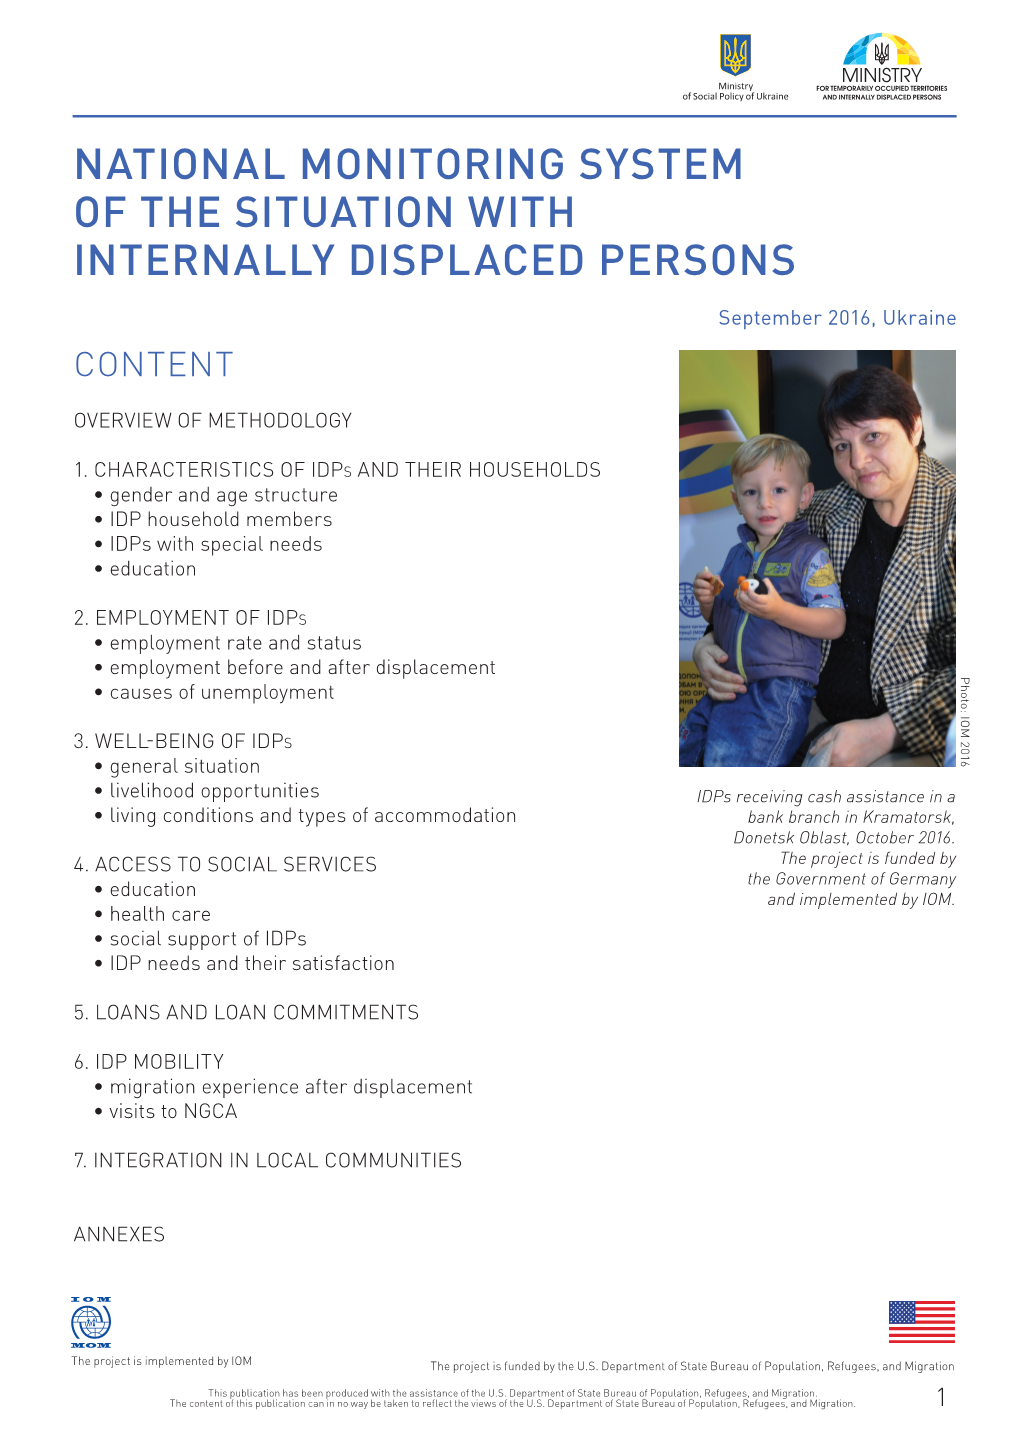 National Monitoring System of the Situation with Internally Displaced Persons